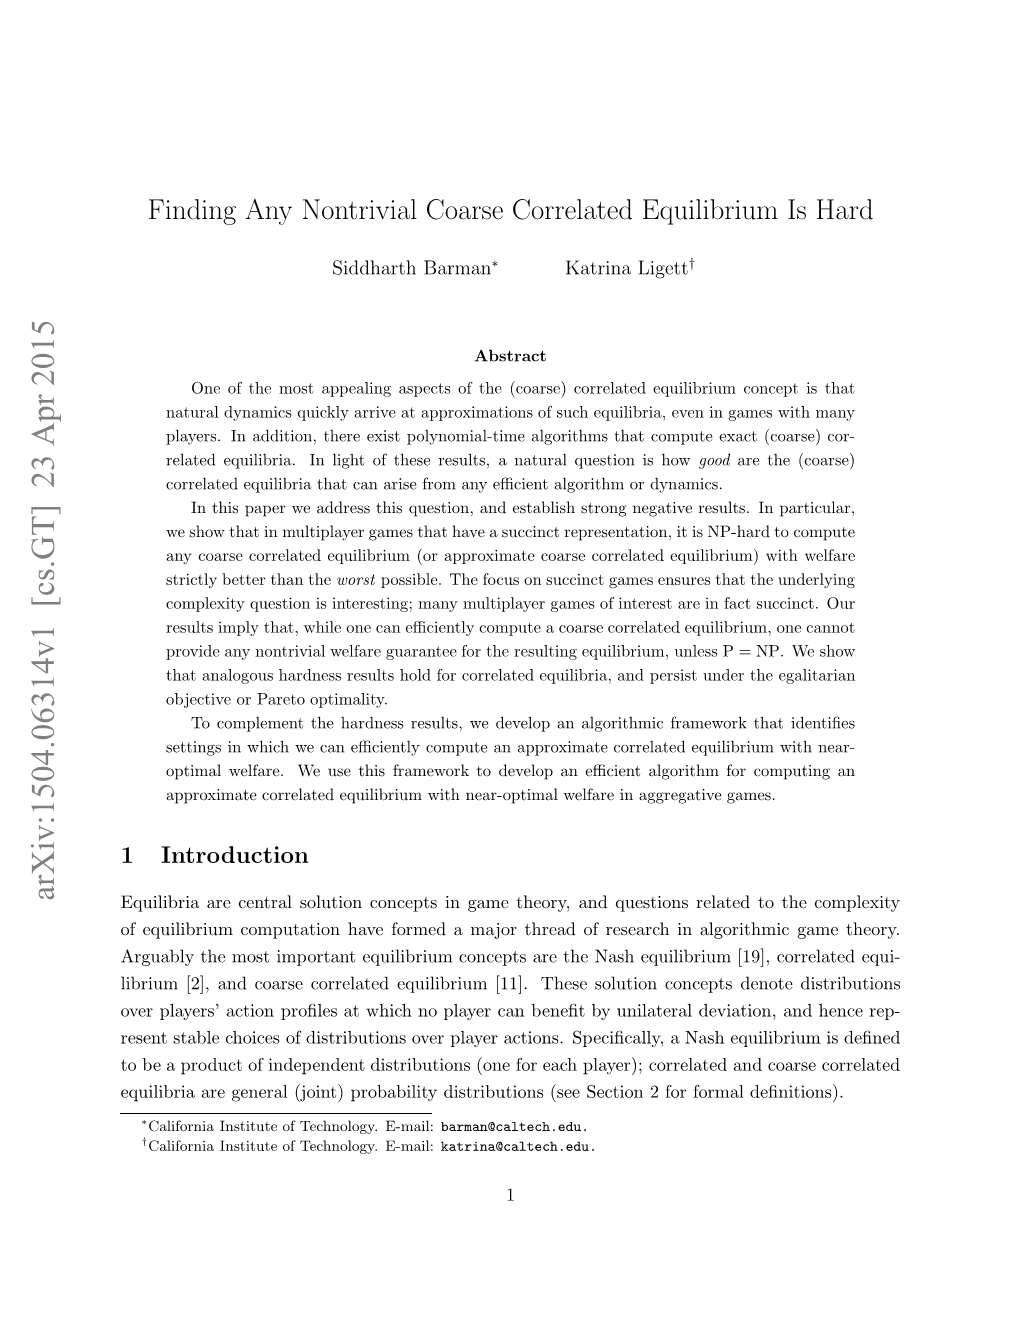 Finding Any Nontrivial Coarse Correlated Equilibrium Is Hard